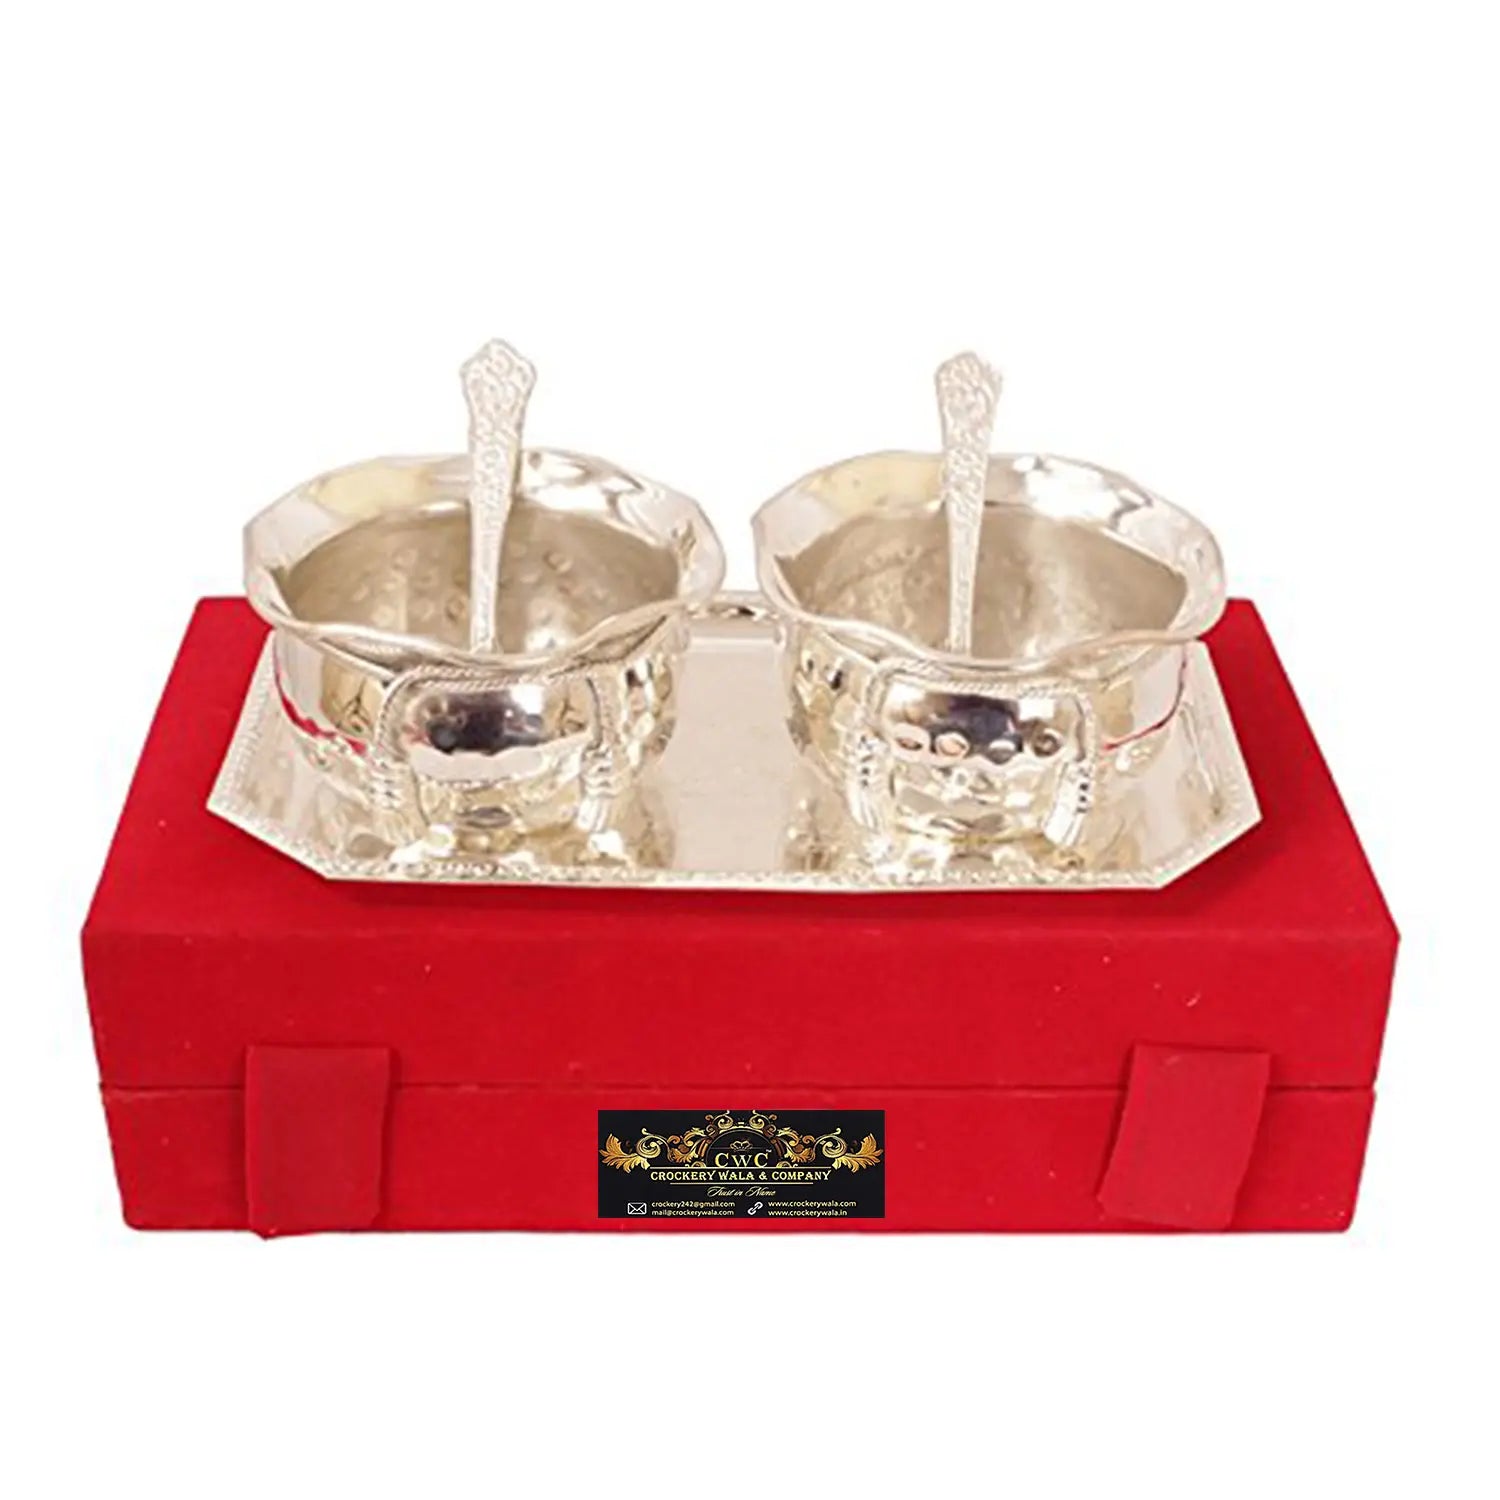 Crockery Wala & Company Silver Plated Bowl Set With Embossed Tray And 2 Spoon, 300 Ml Each, Service For 2 - CROCKERY WALA AND COMPANY 